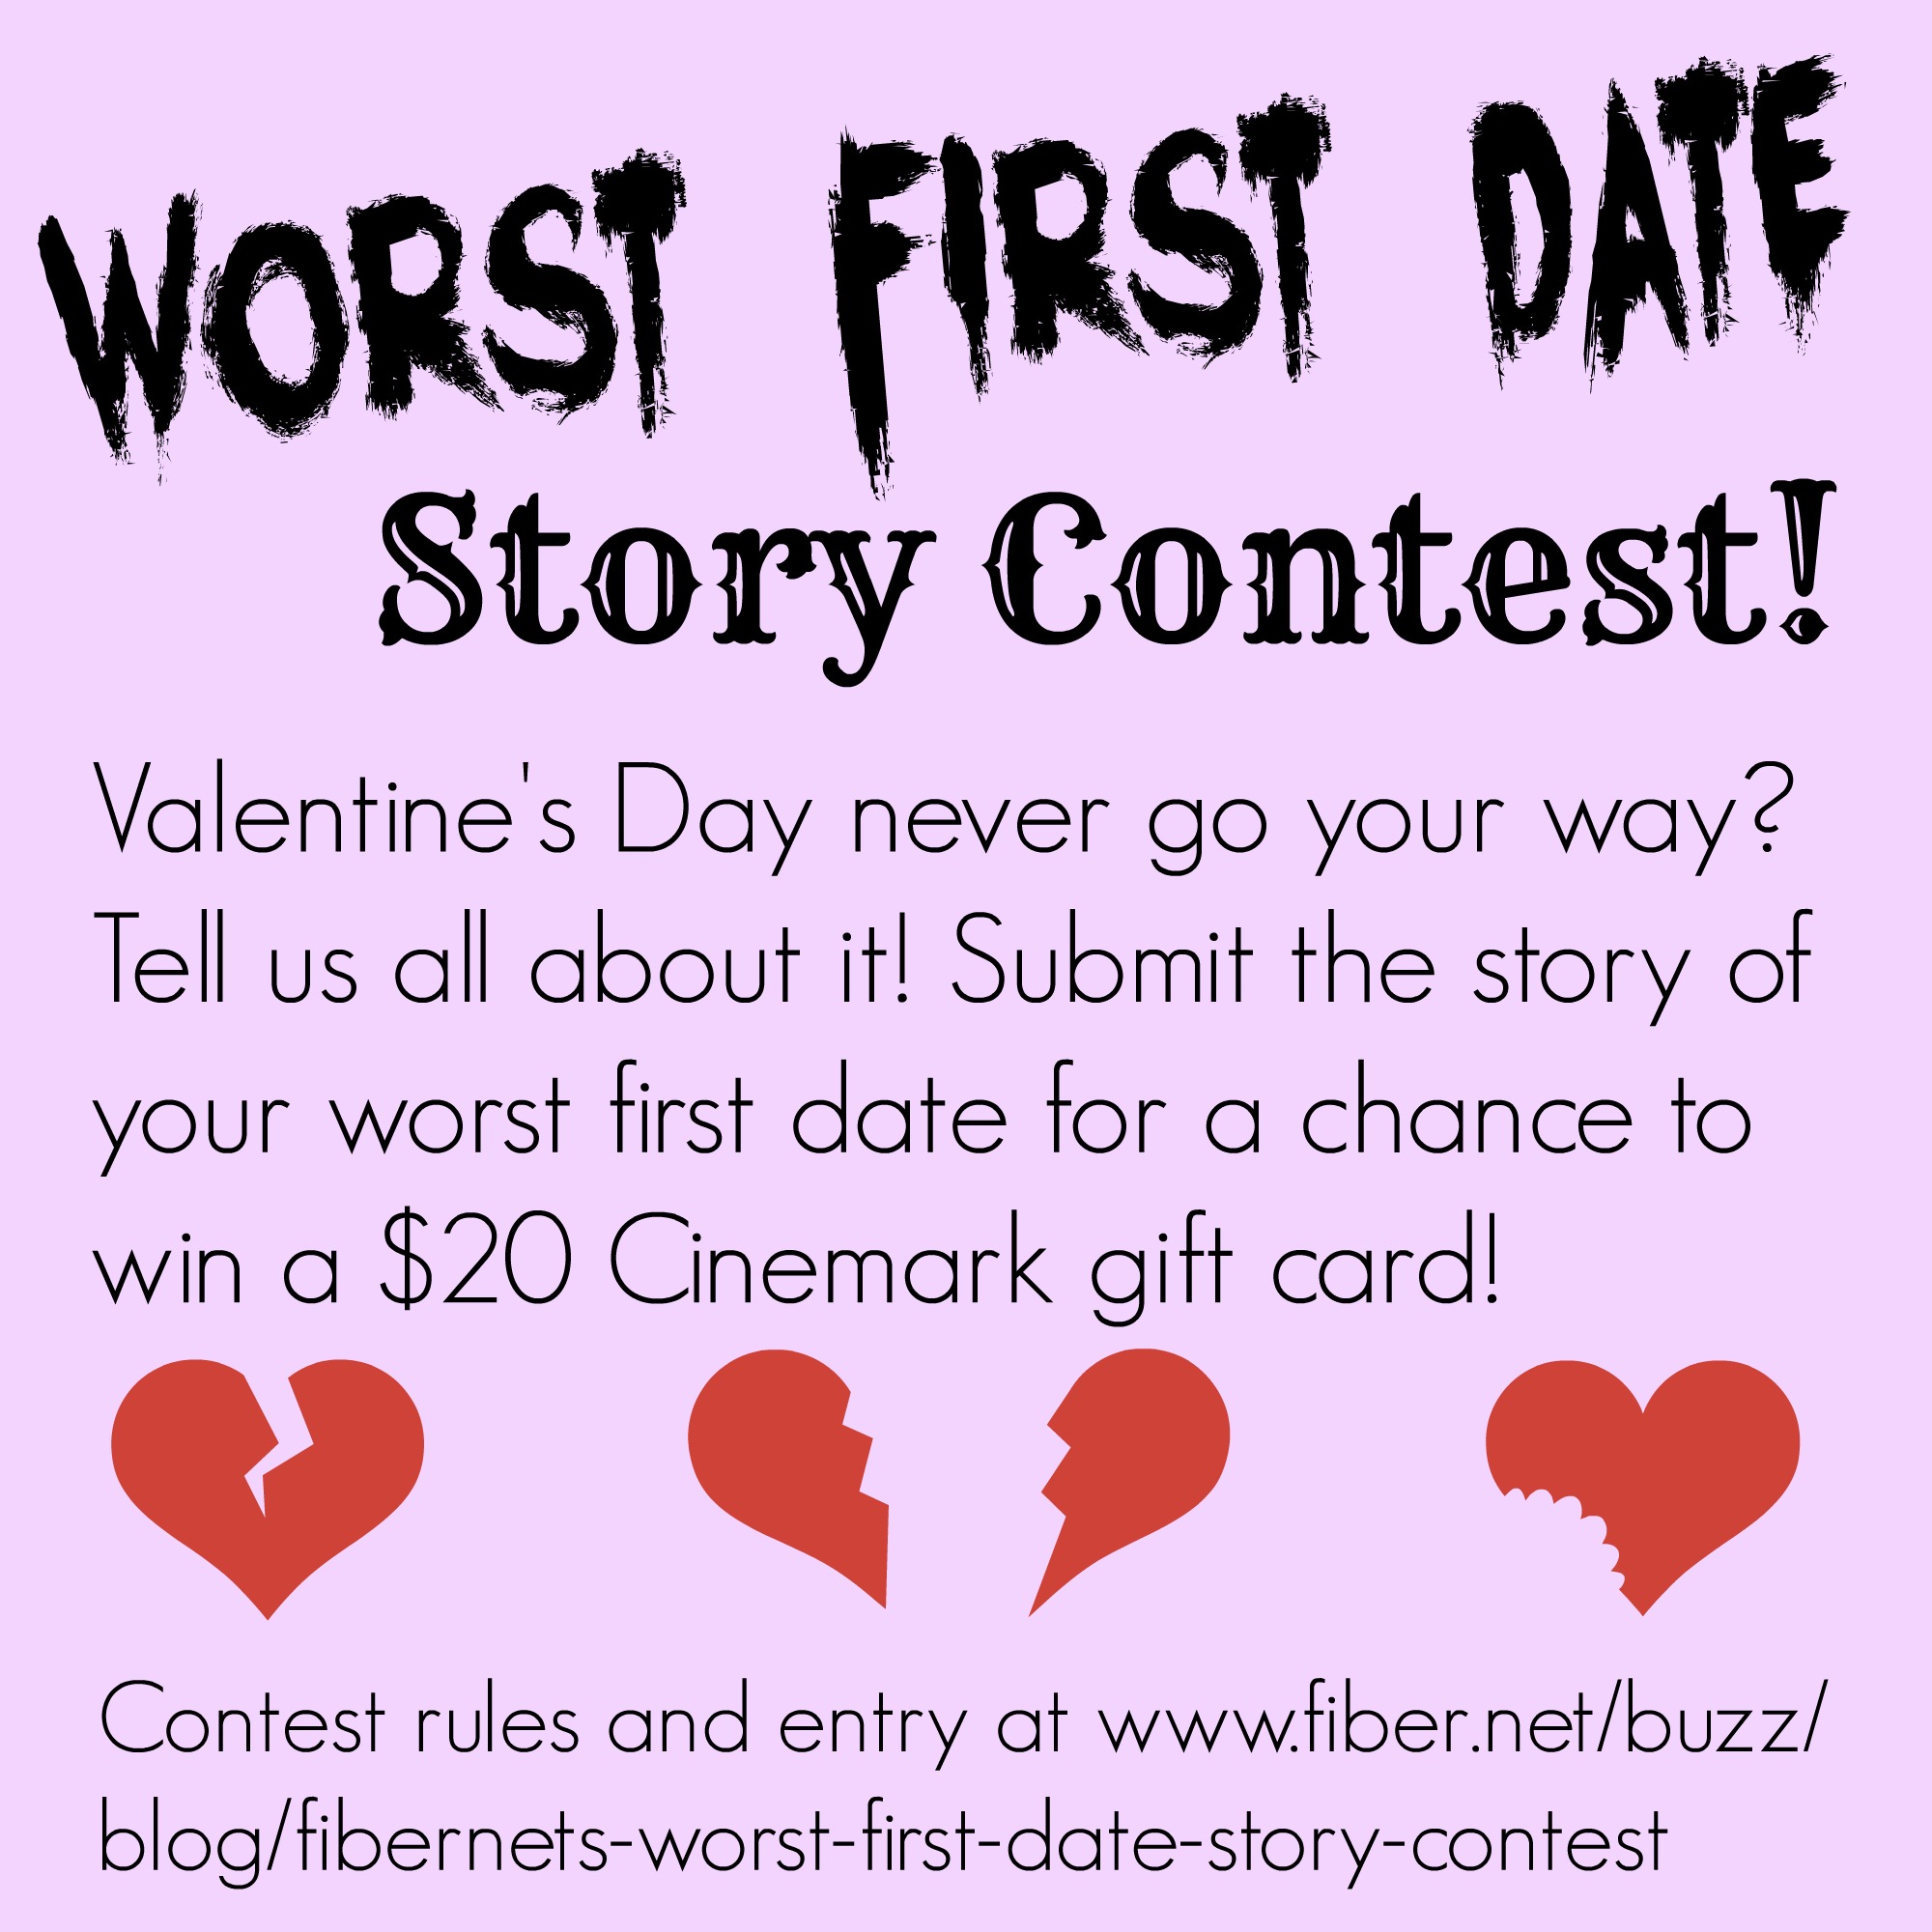 Submit the story of your worst first date for a chance to win a $20 gift card!